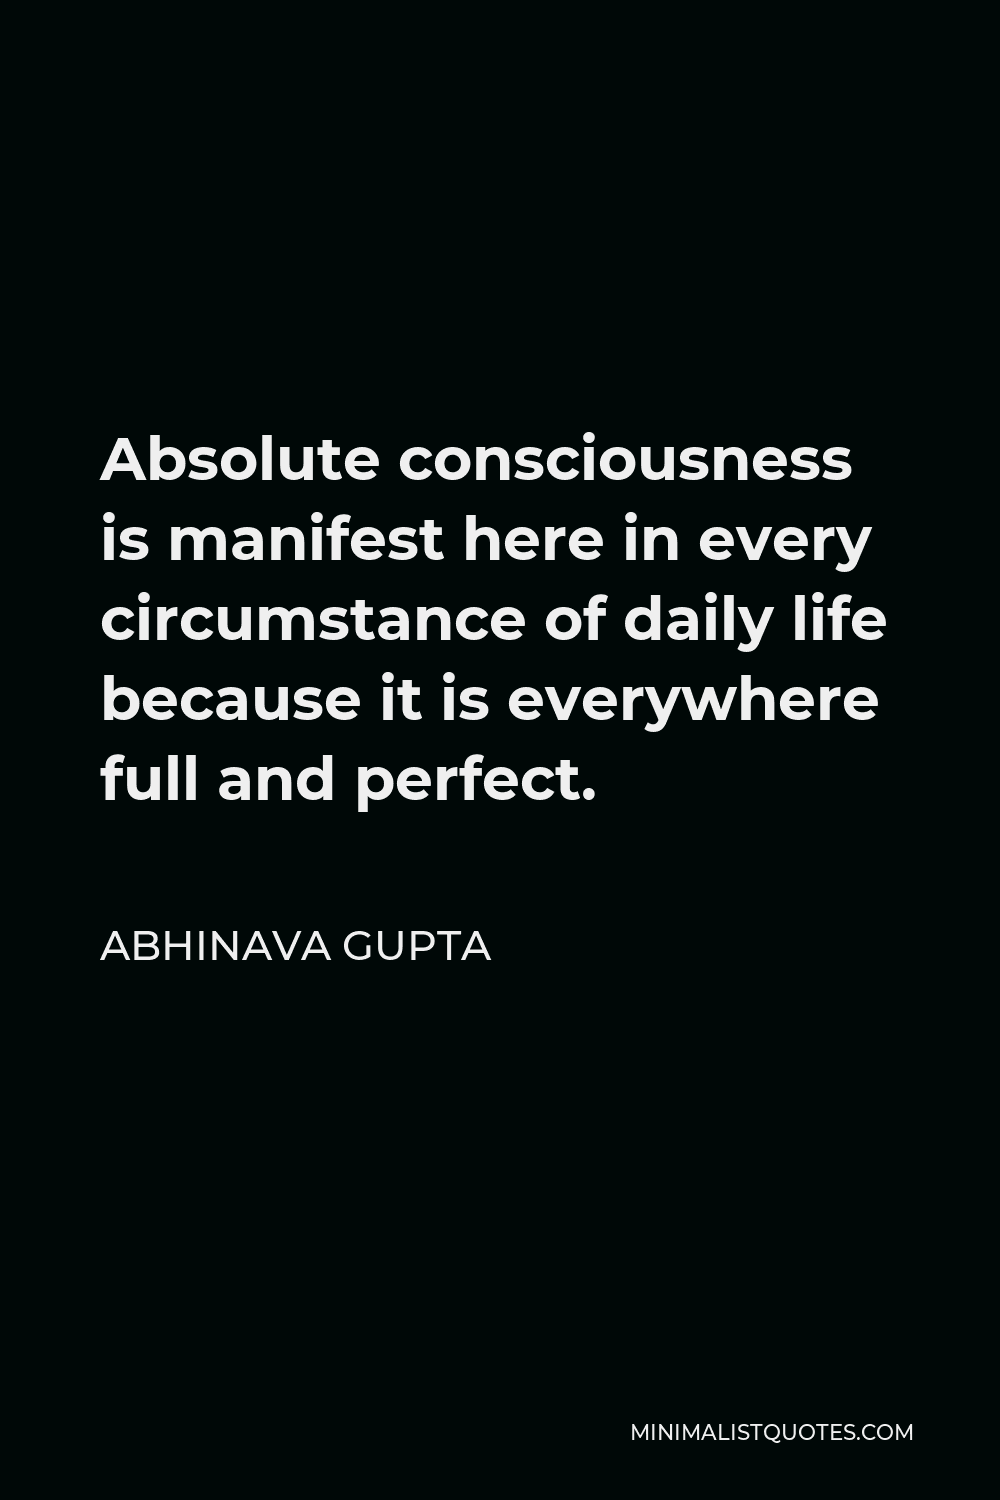 Abhinava Gupta Quote - Absolute consciousness is manifest here in every circumstance of daily life because it is everywhere full and perfect.